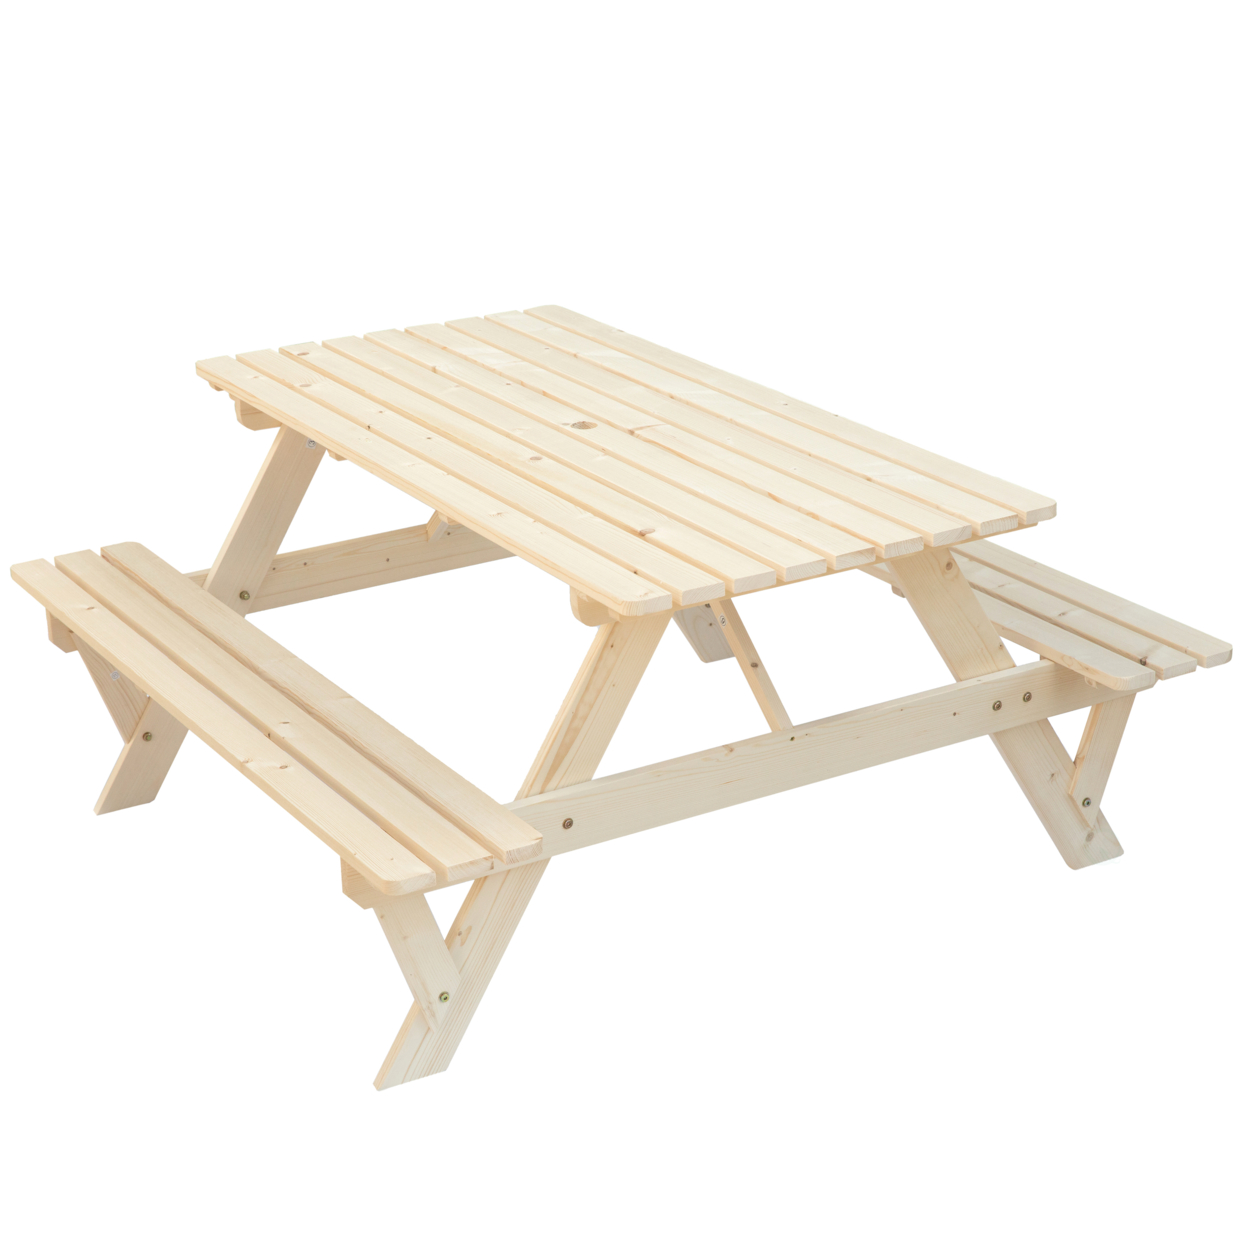 A-Frame Outdoor Patio Deck Garden Picnic Table - Stained